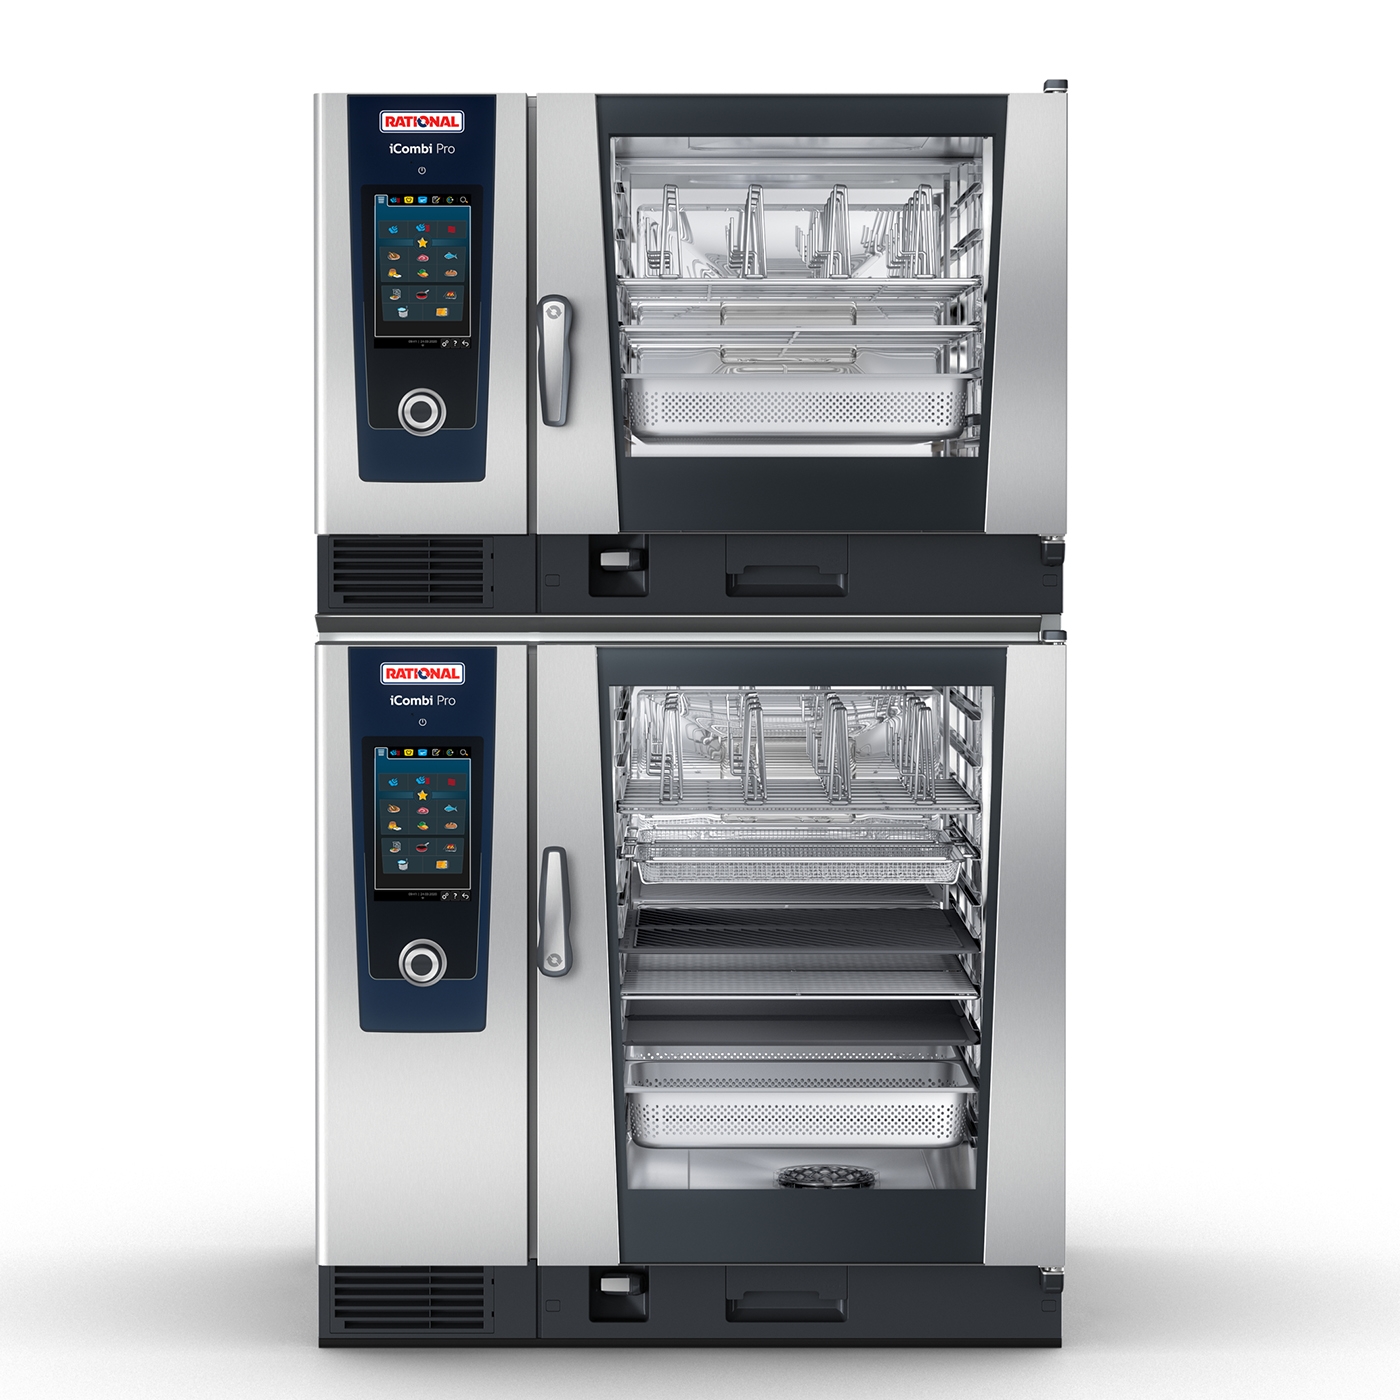 RATIONAL ICP Double Stacked 6/10 Full-Size Electric Combi Oven w/ Programmable Controls, Steam Generator, 208-240v